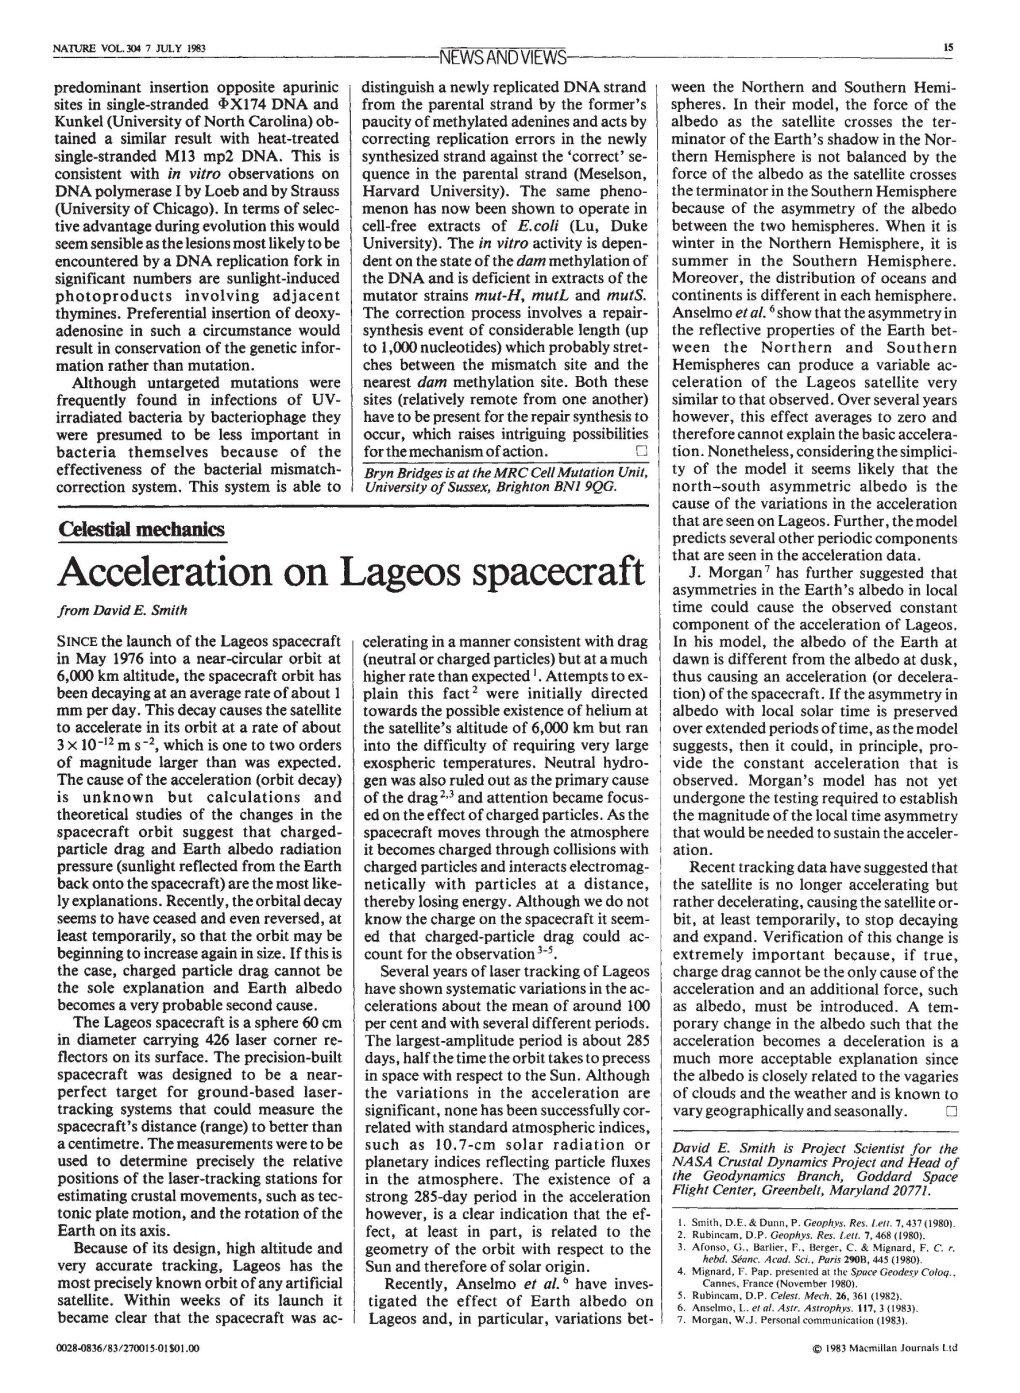 Acceleration on Lageos Spacecraft Asymmetries in the Earth's Albedo in Local from David E